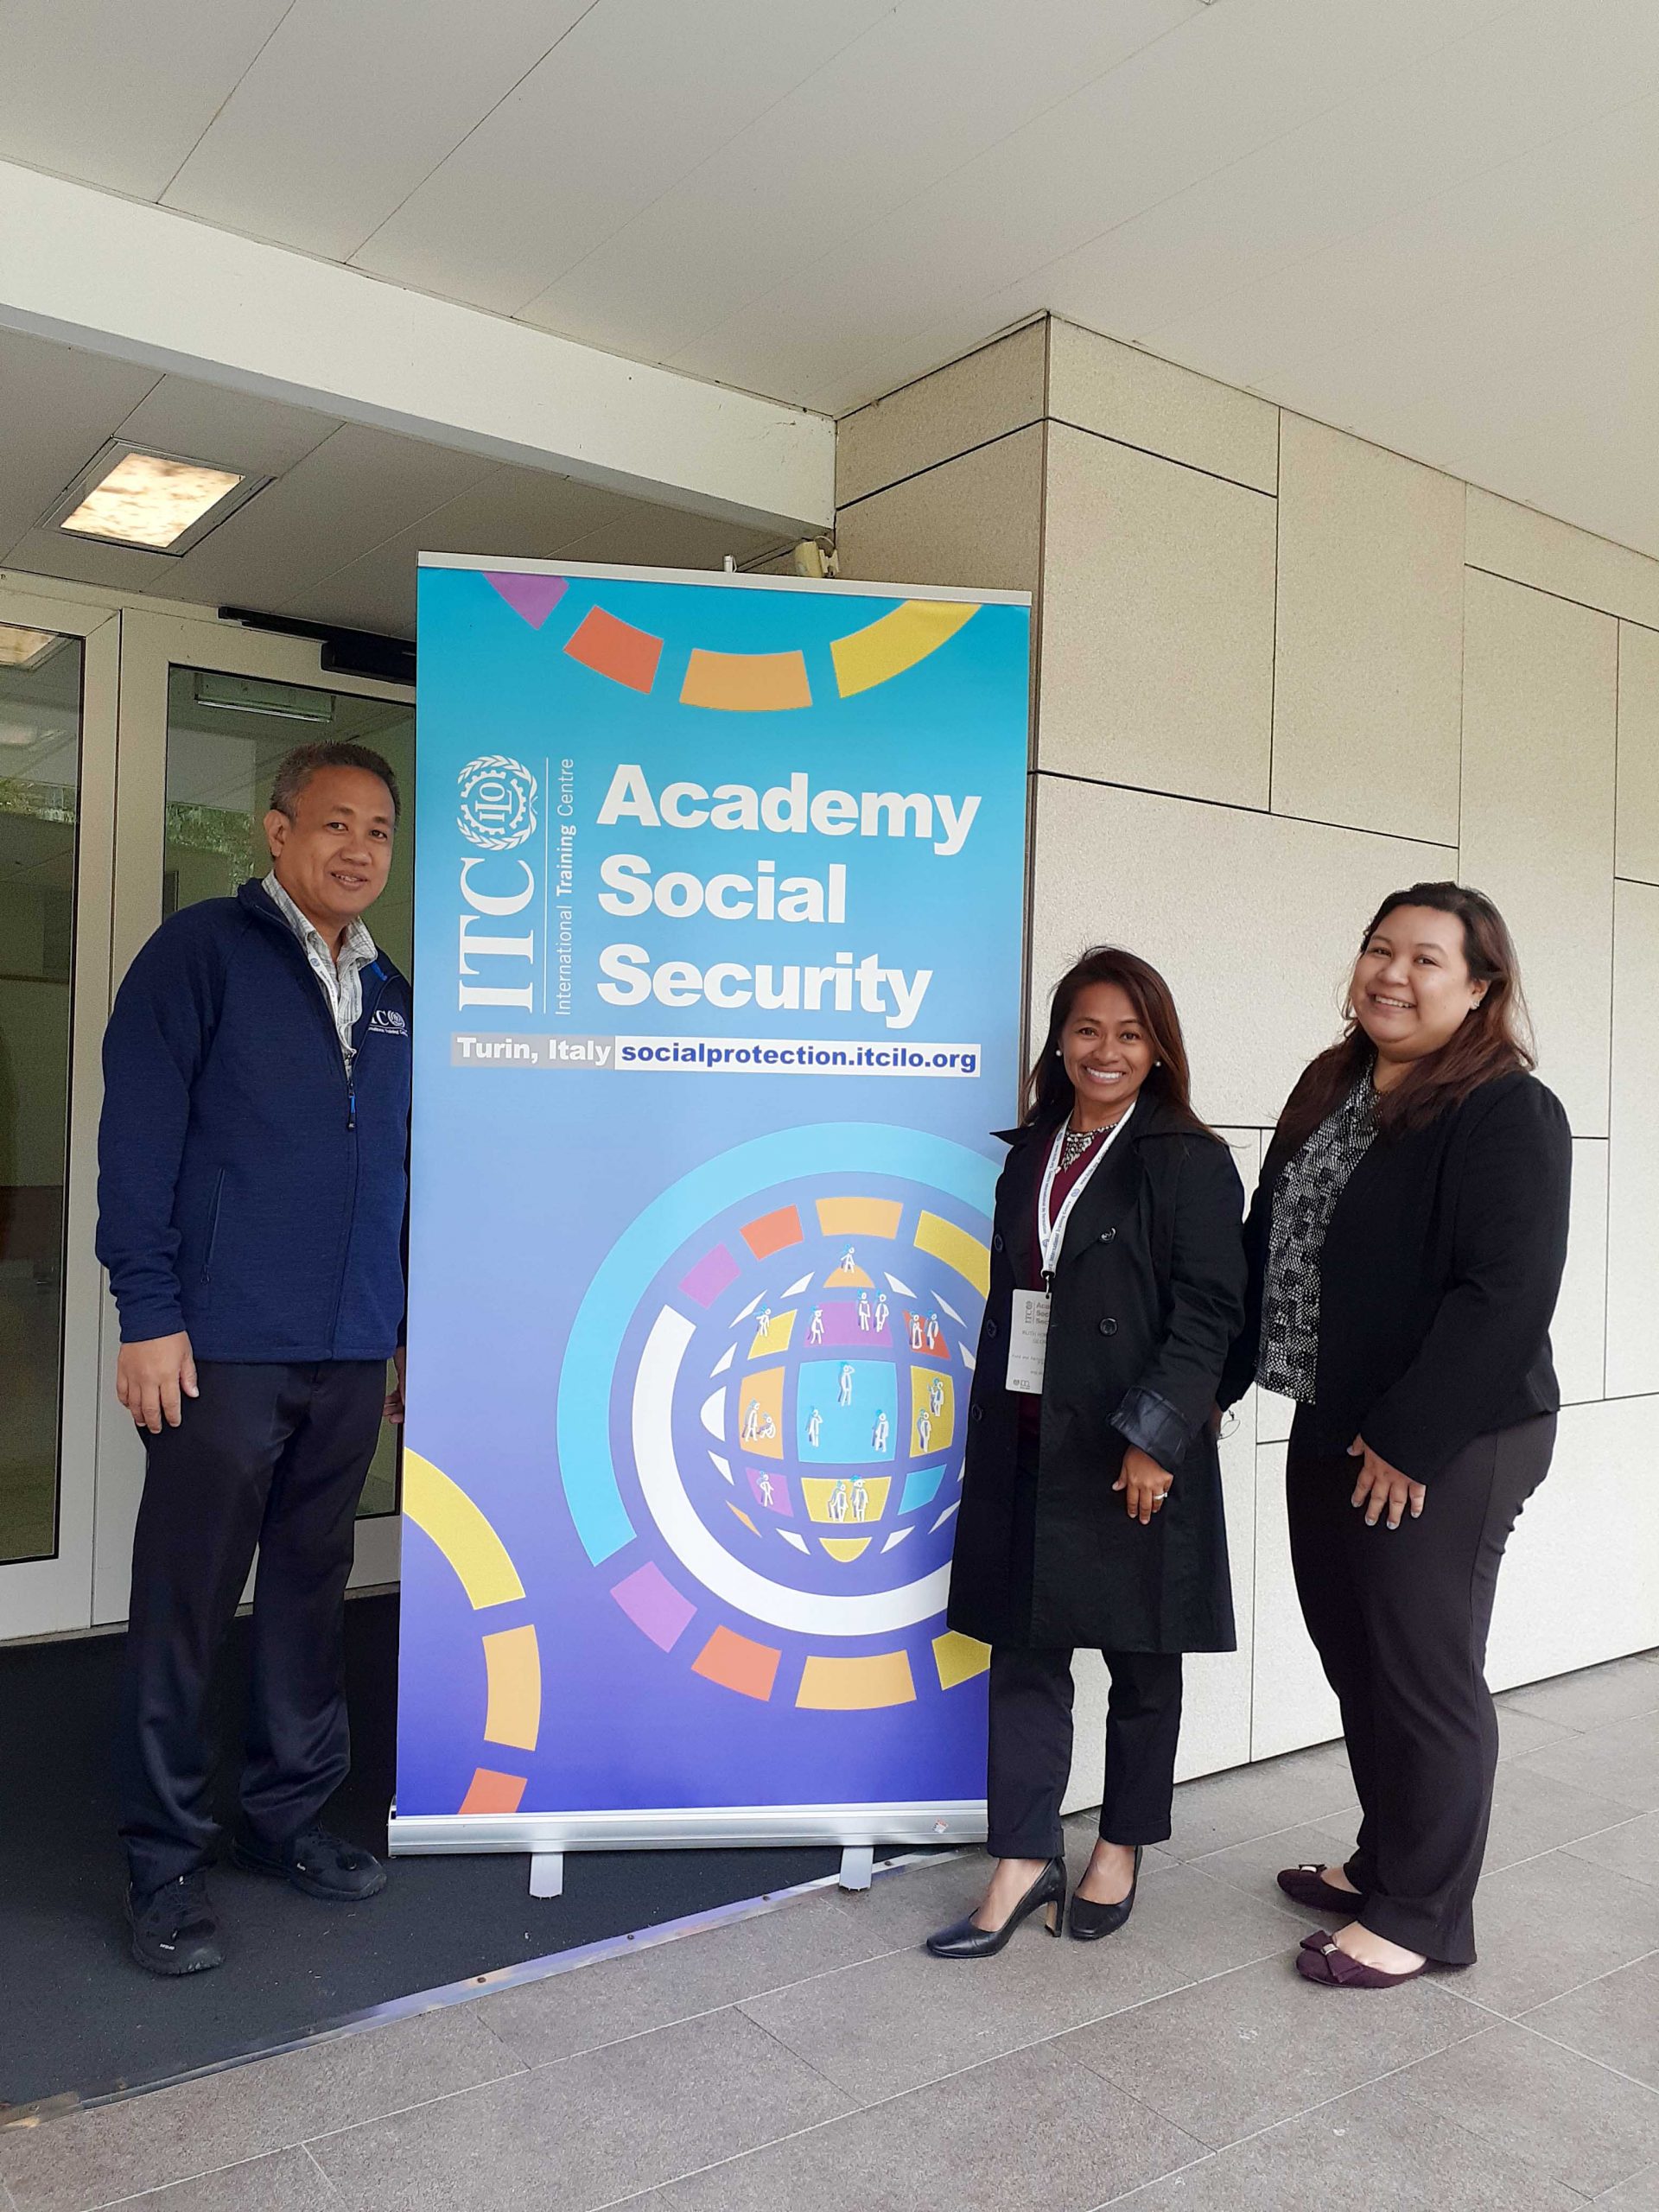 SAAD joins Social Security Academy, PH ranked 2nd best delegation